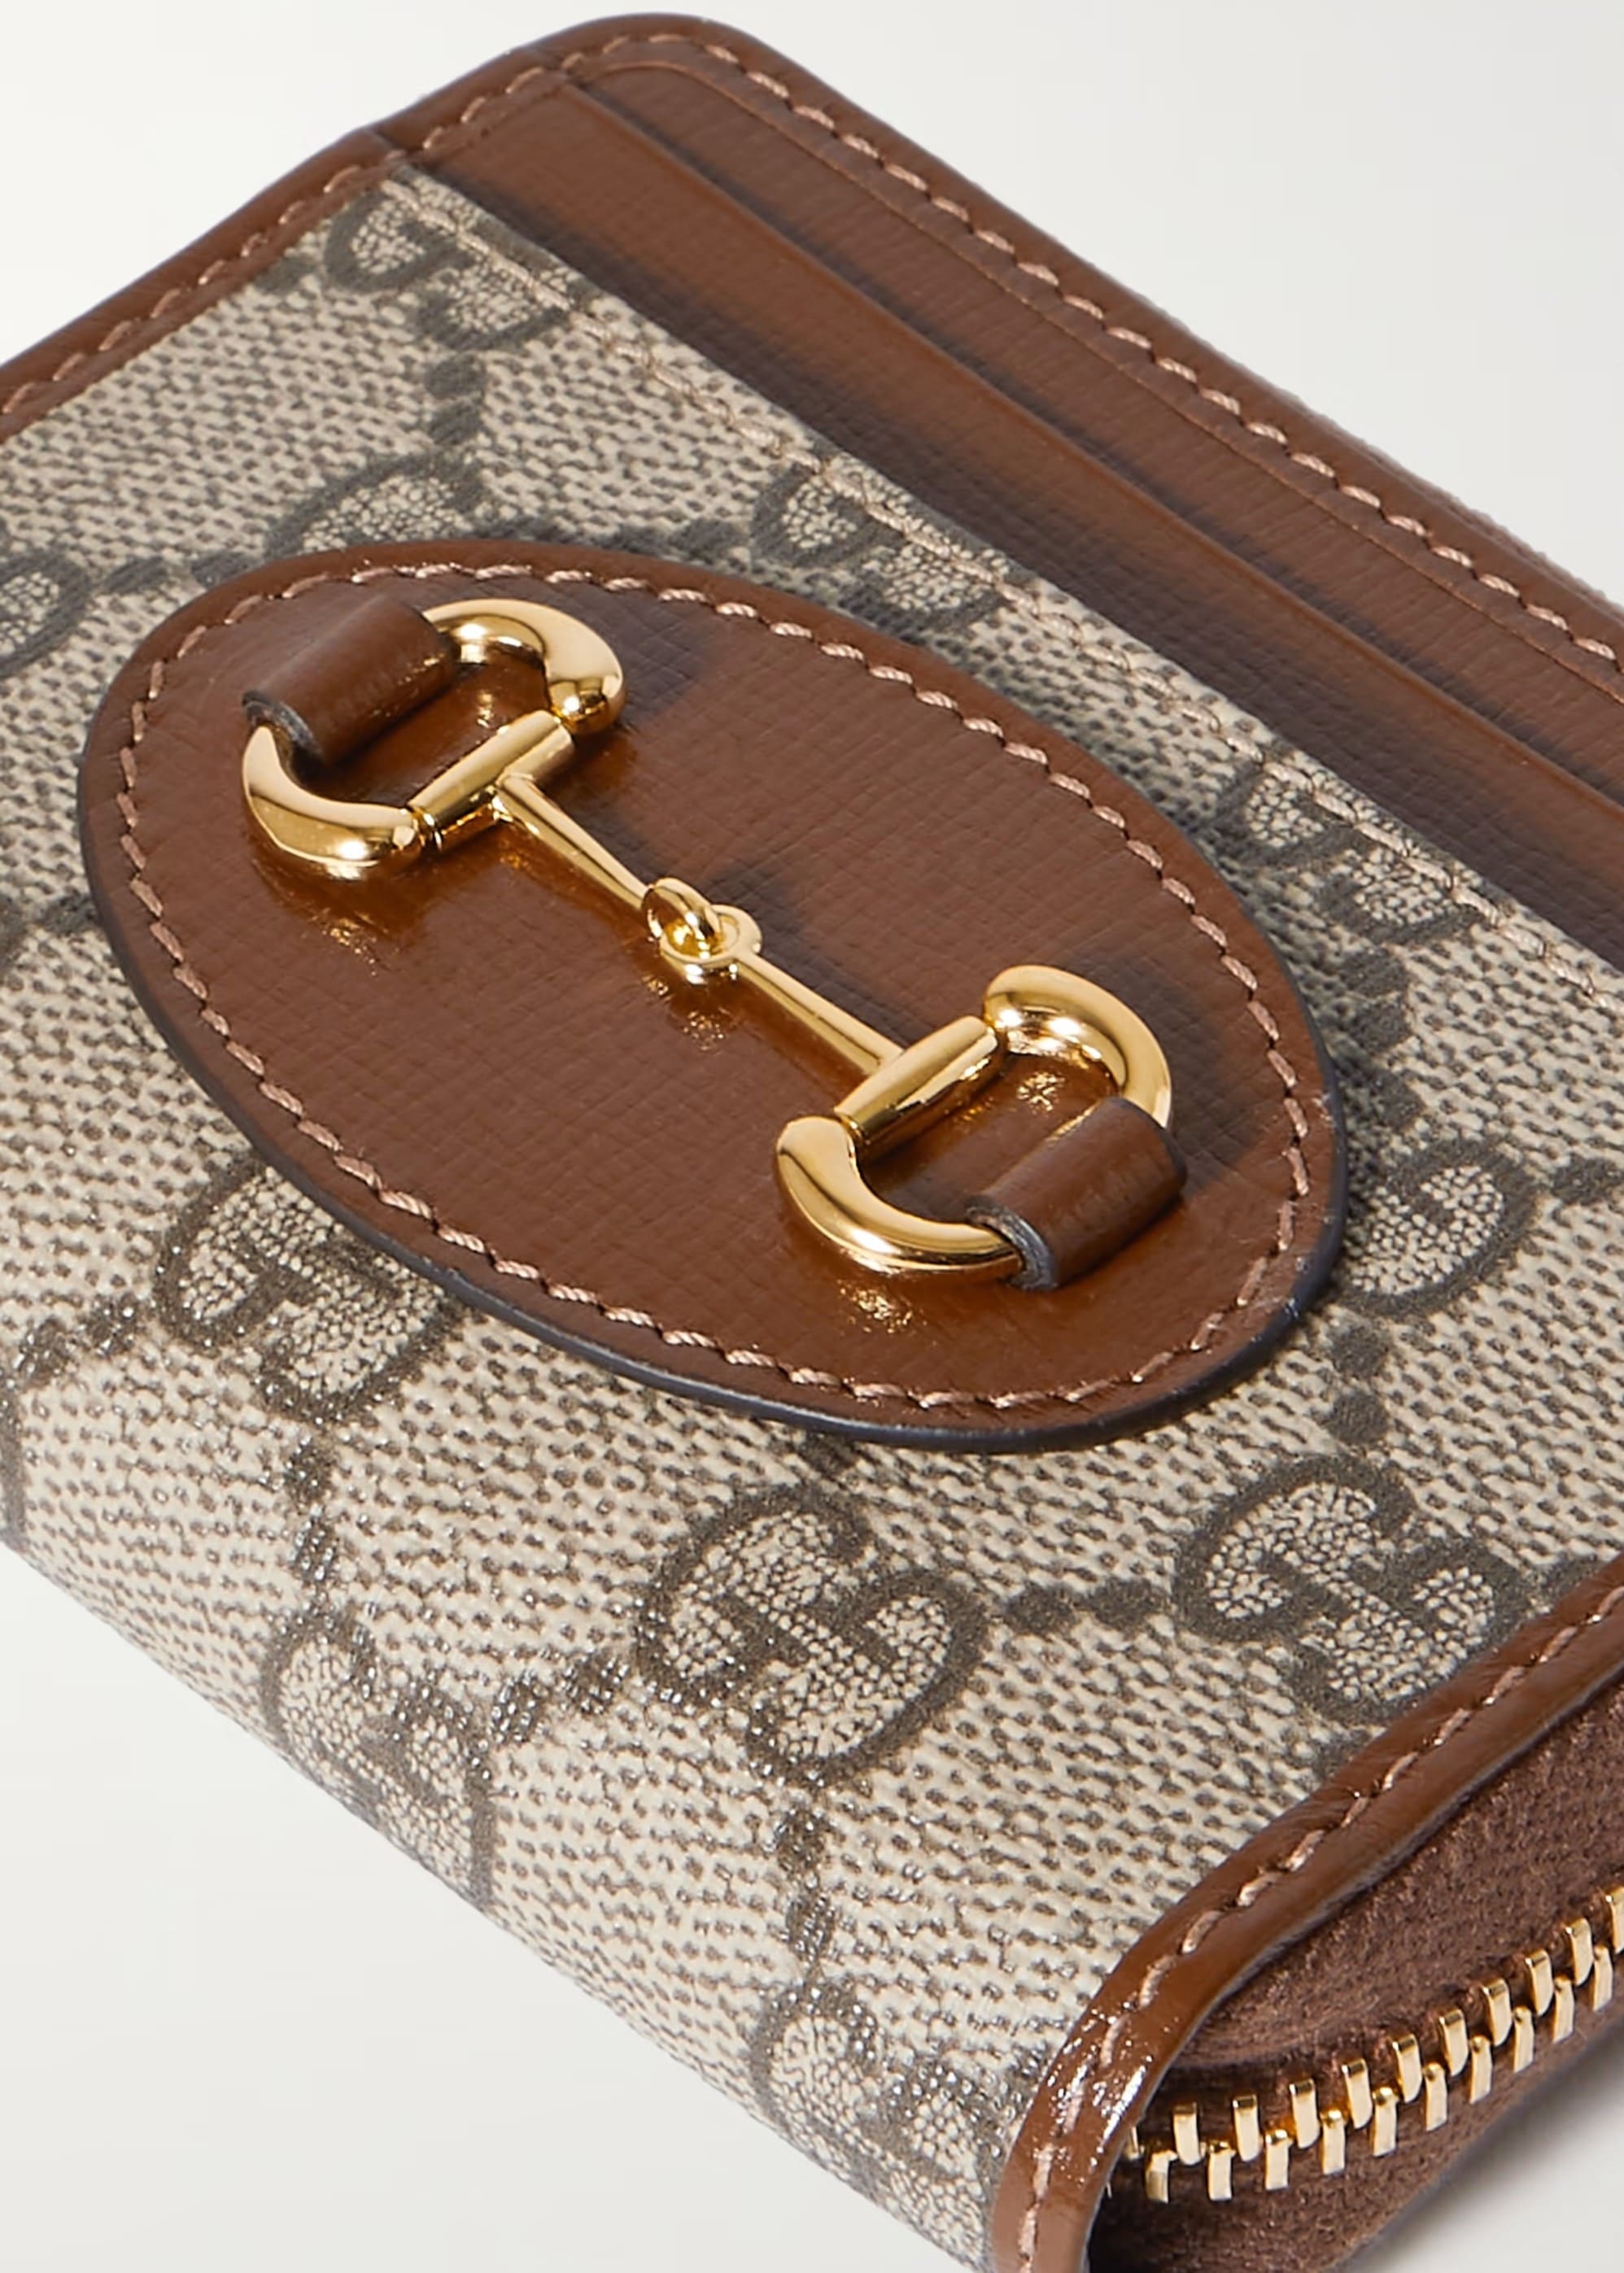 VÍ NGẮN NỮ CẦM TAY GUCCI HORSEBIT 1955 SMALL BROWN LEATHER TRIMMED PRINTED COATED CANVAS CARDHOLDER 3